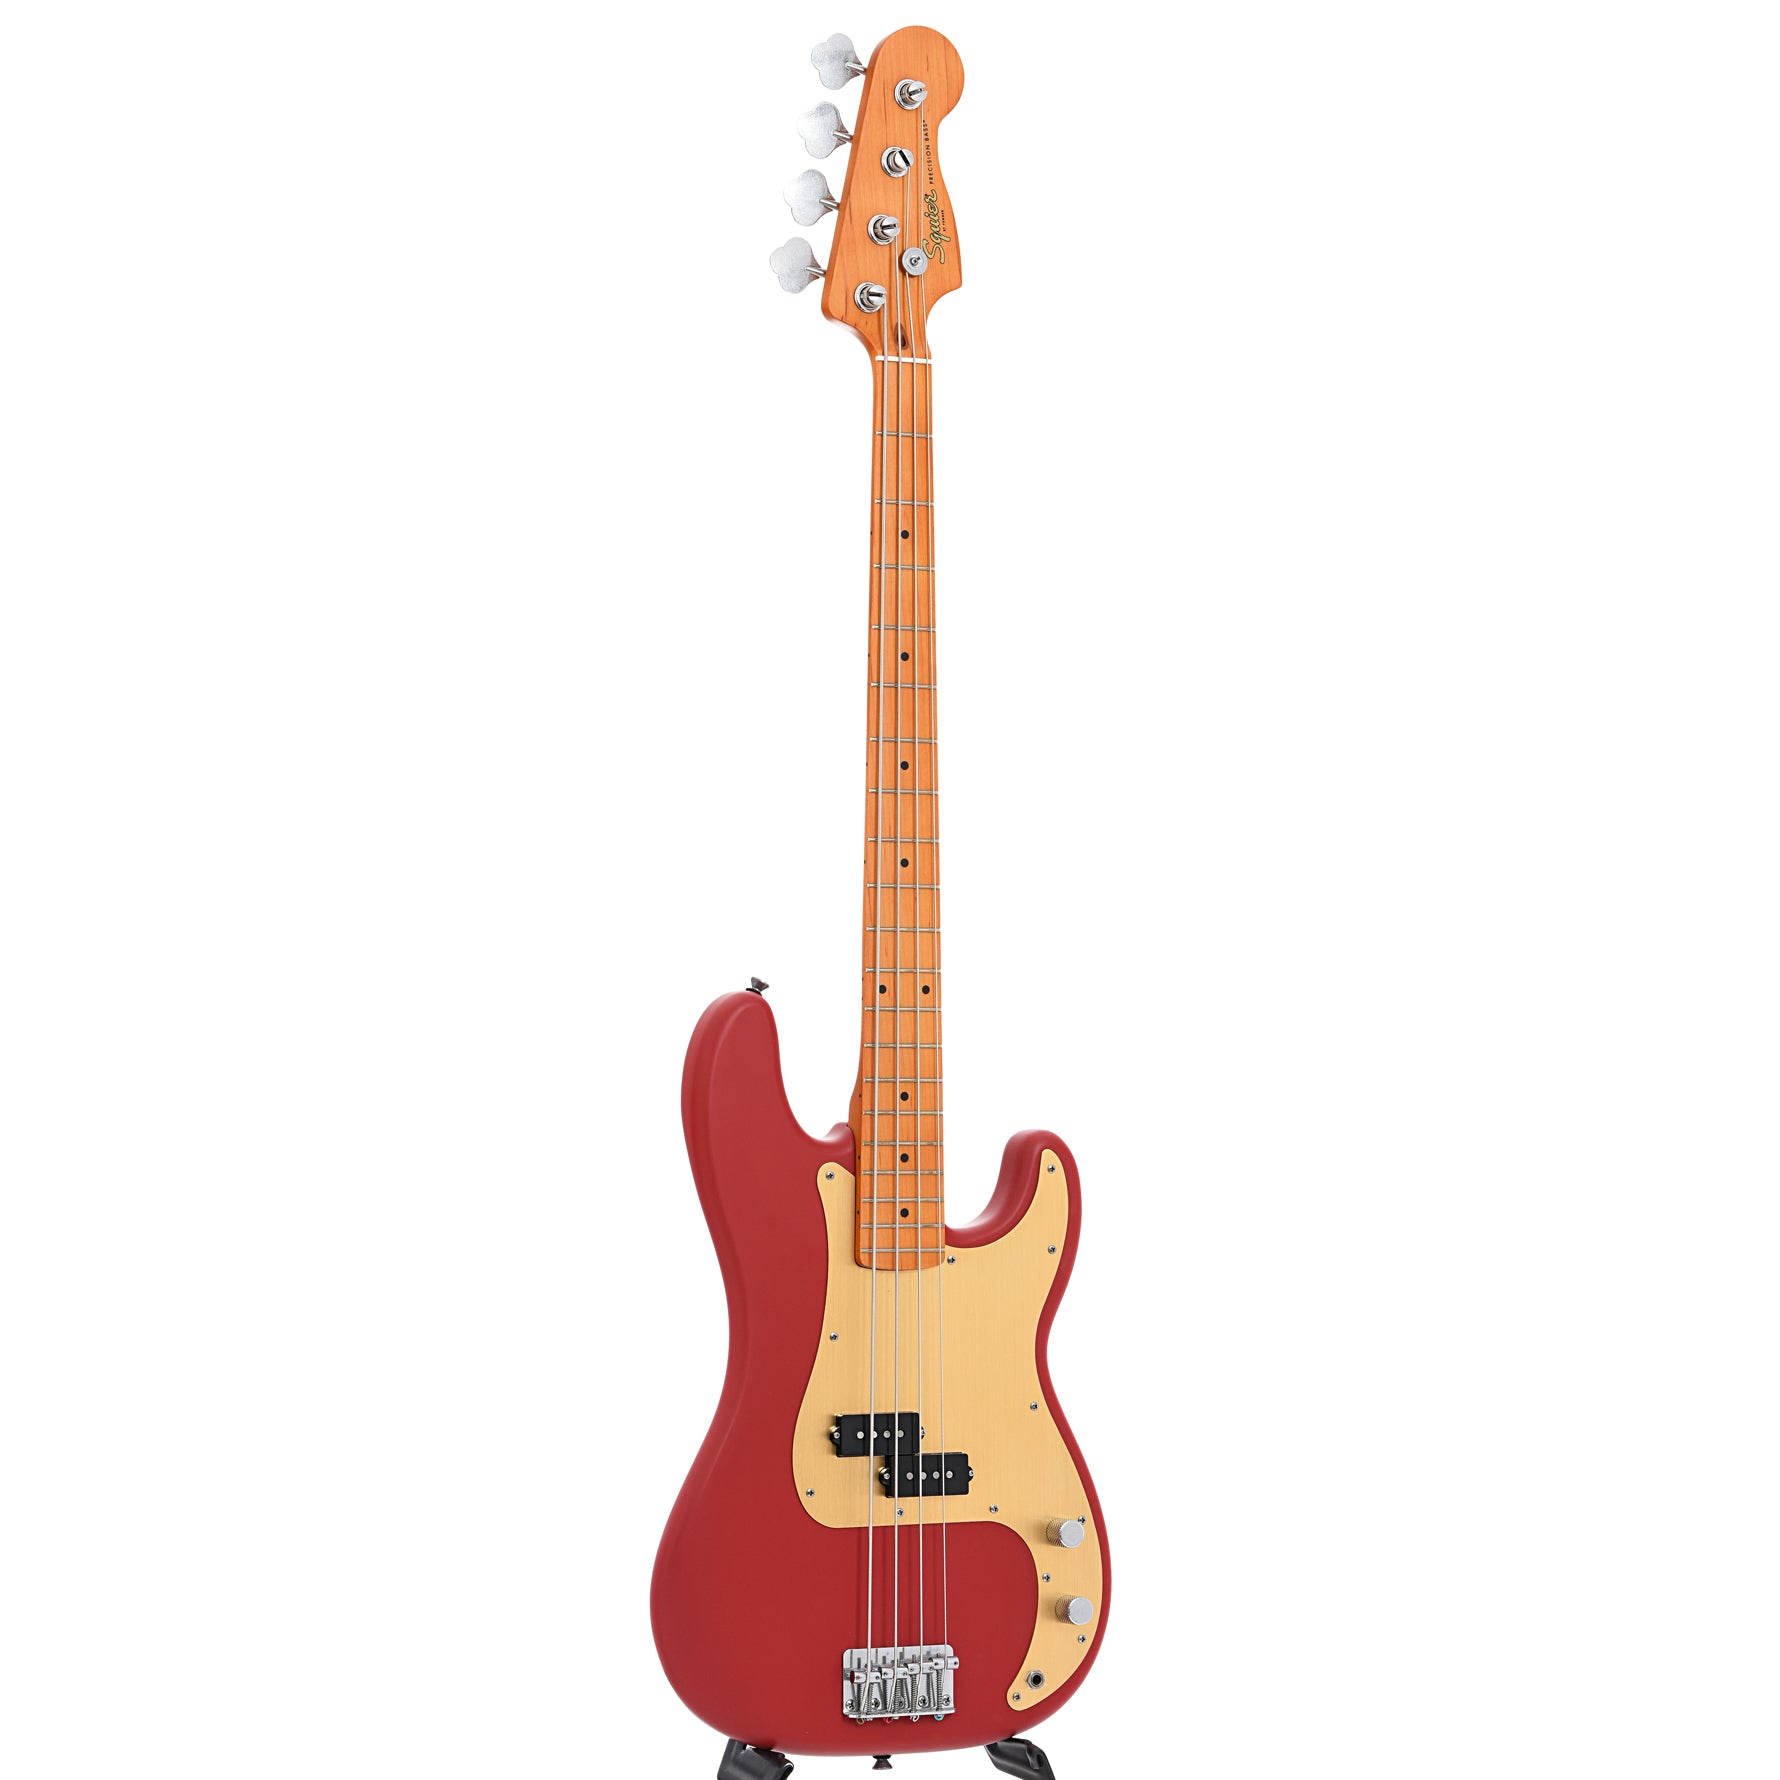 Full front and side of Squier 40th Anniversary Precision Bass, Vintage Edition, Satin Dakota Red